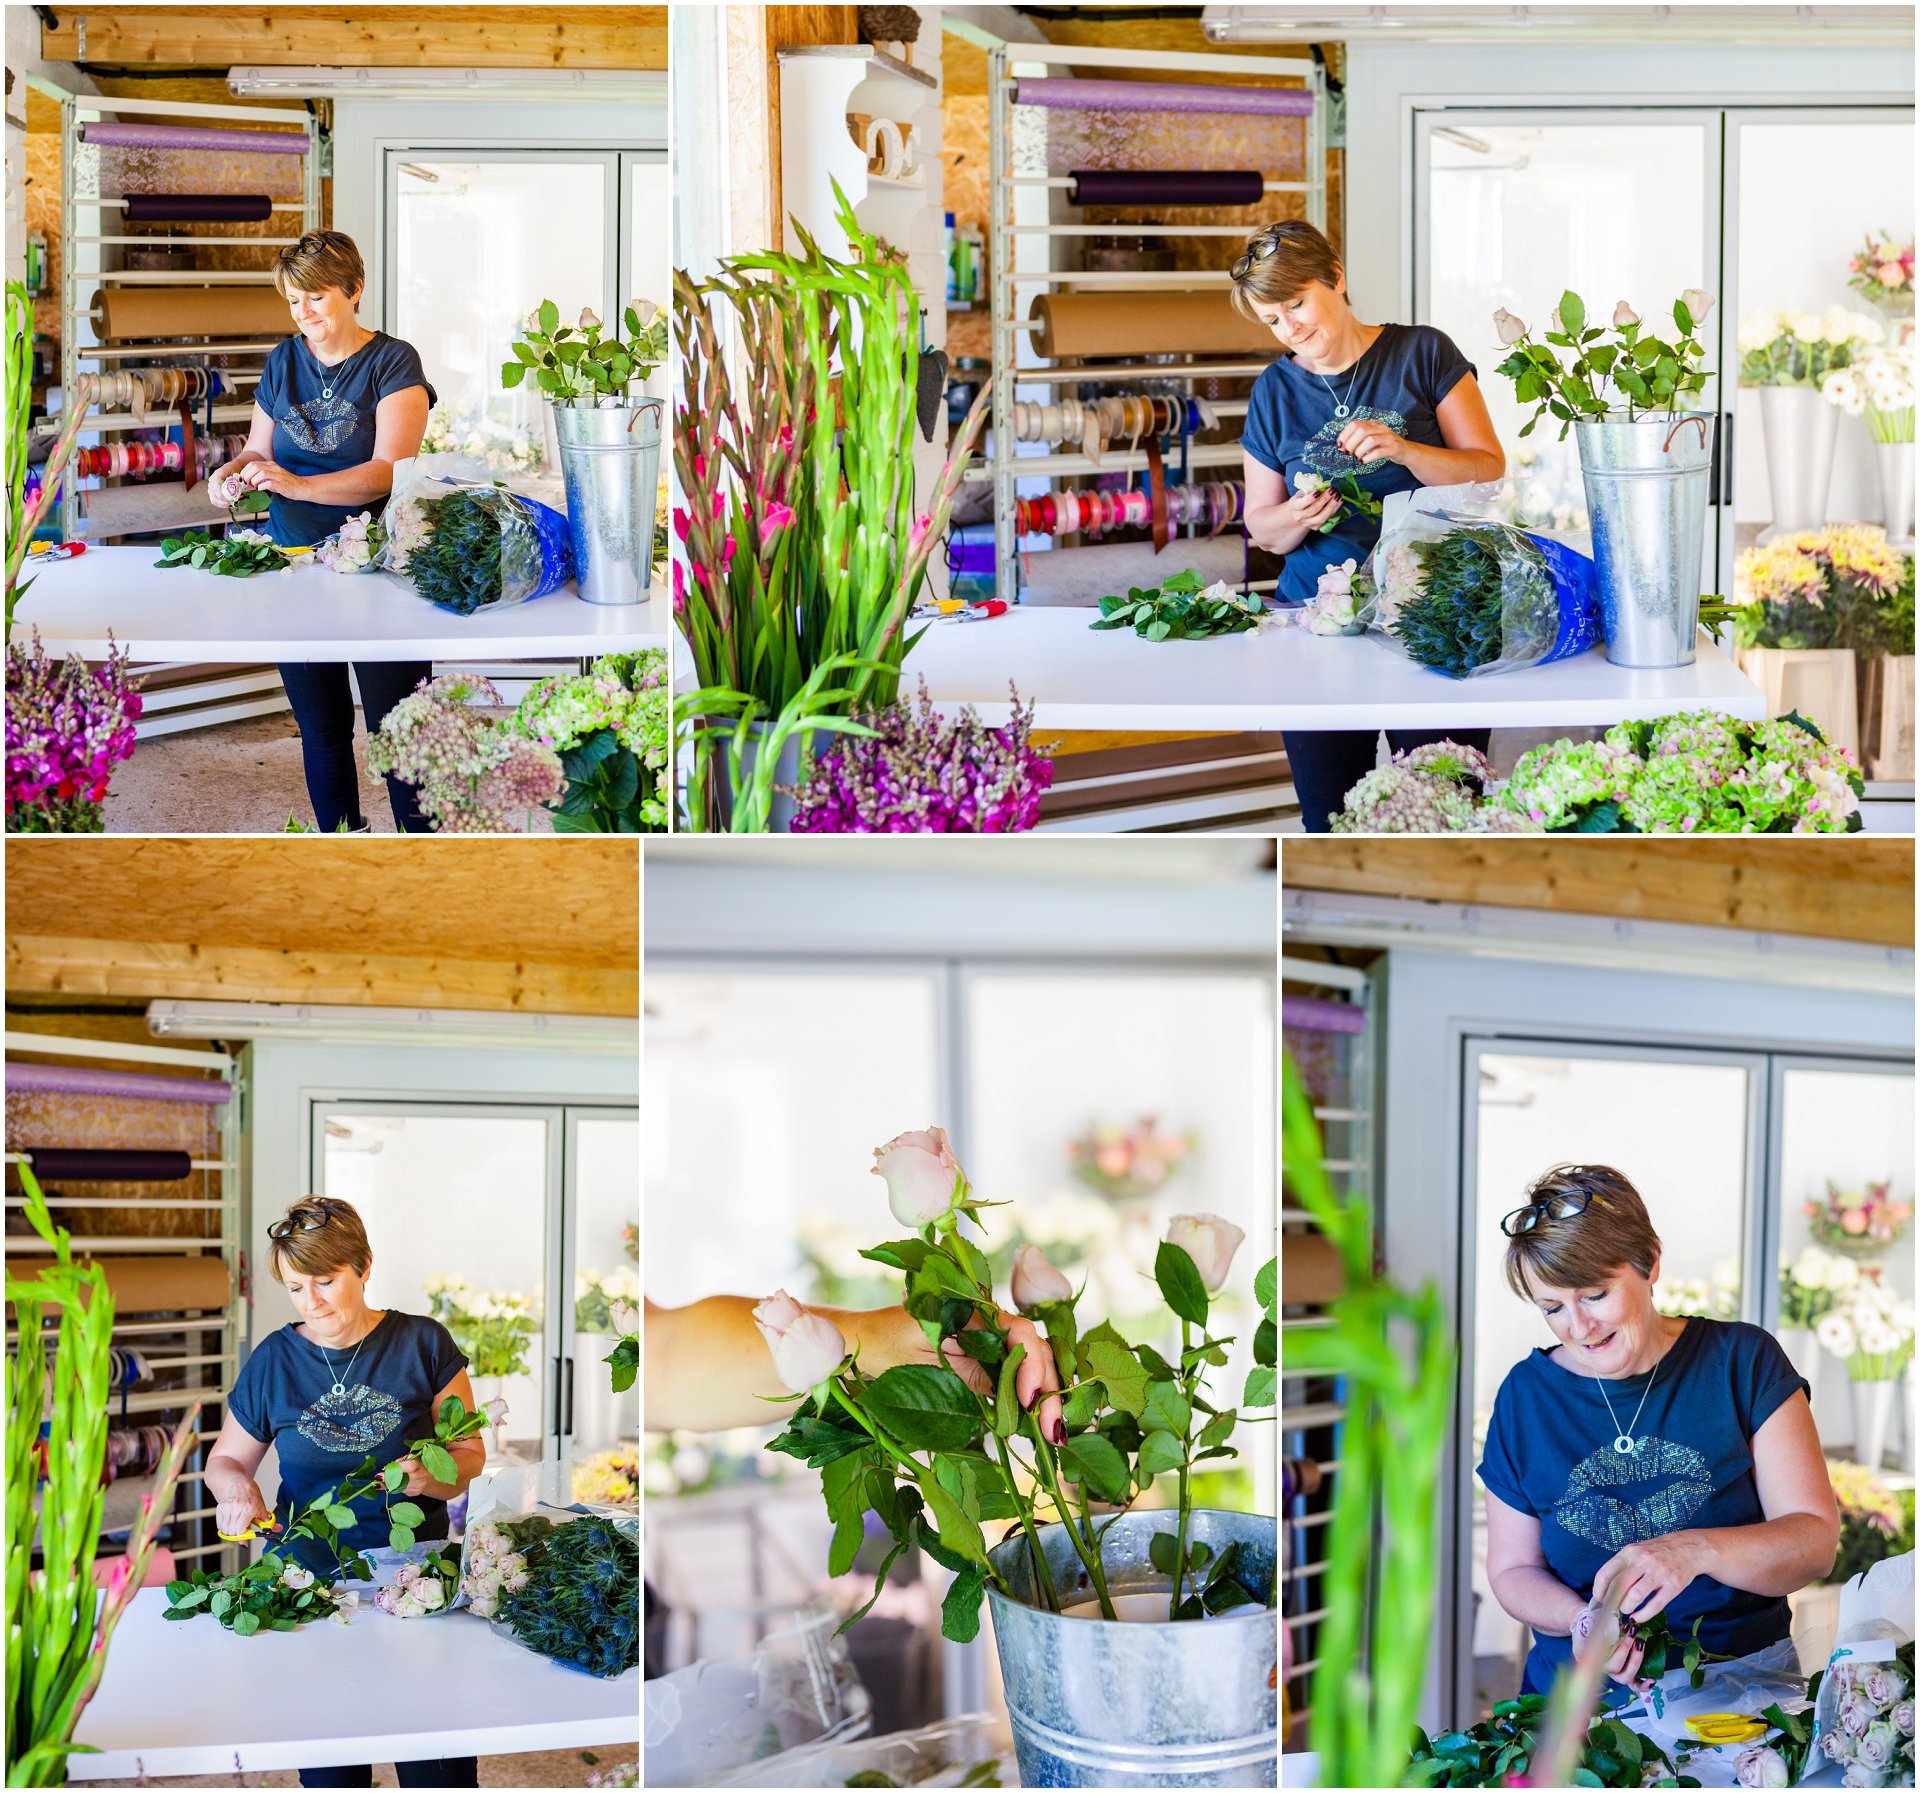 Florist Blooms by Julie conditioning flowers in her garden studio. Images by London brand photographer AKP Branding Stories